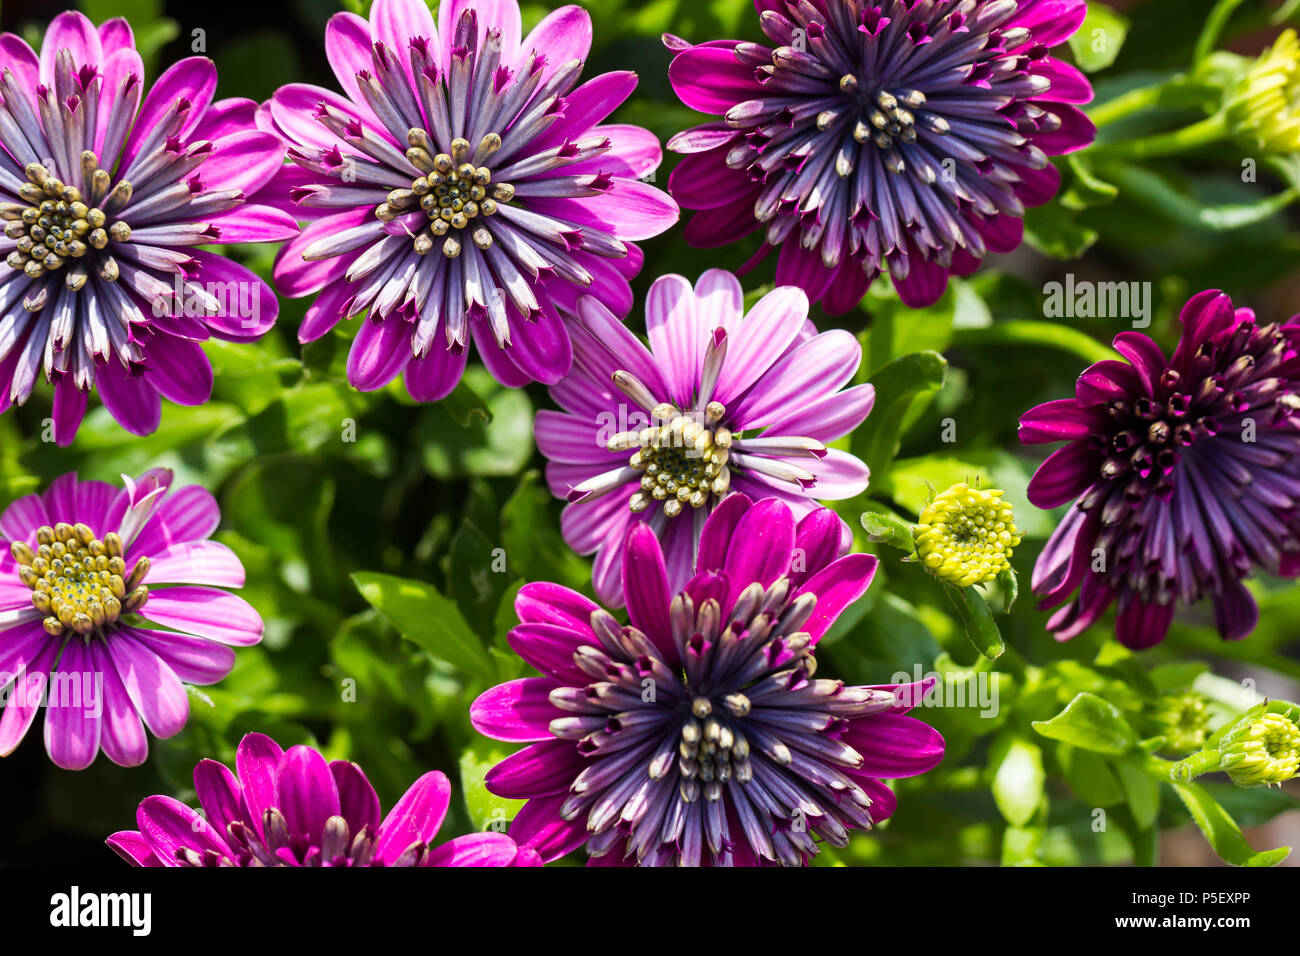 Double African daisy flowers. osteospermum, blooming in summertime, Dorset, United Kingdom Stock Photo